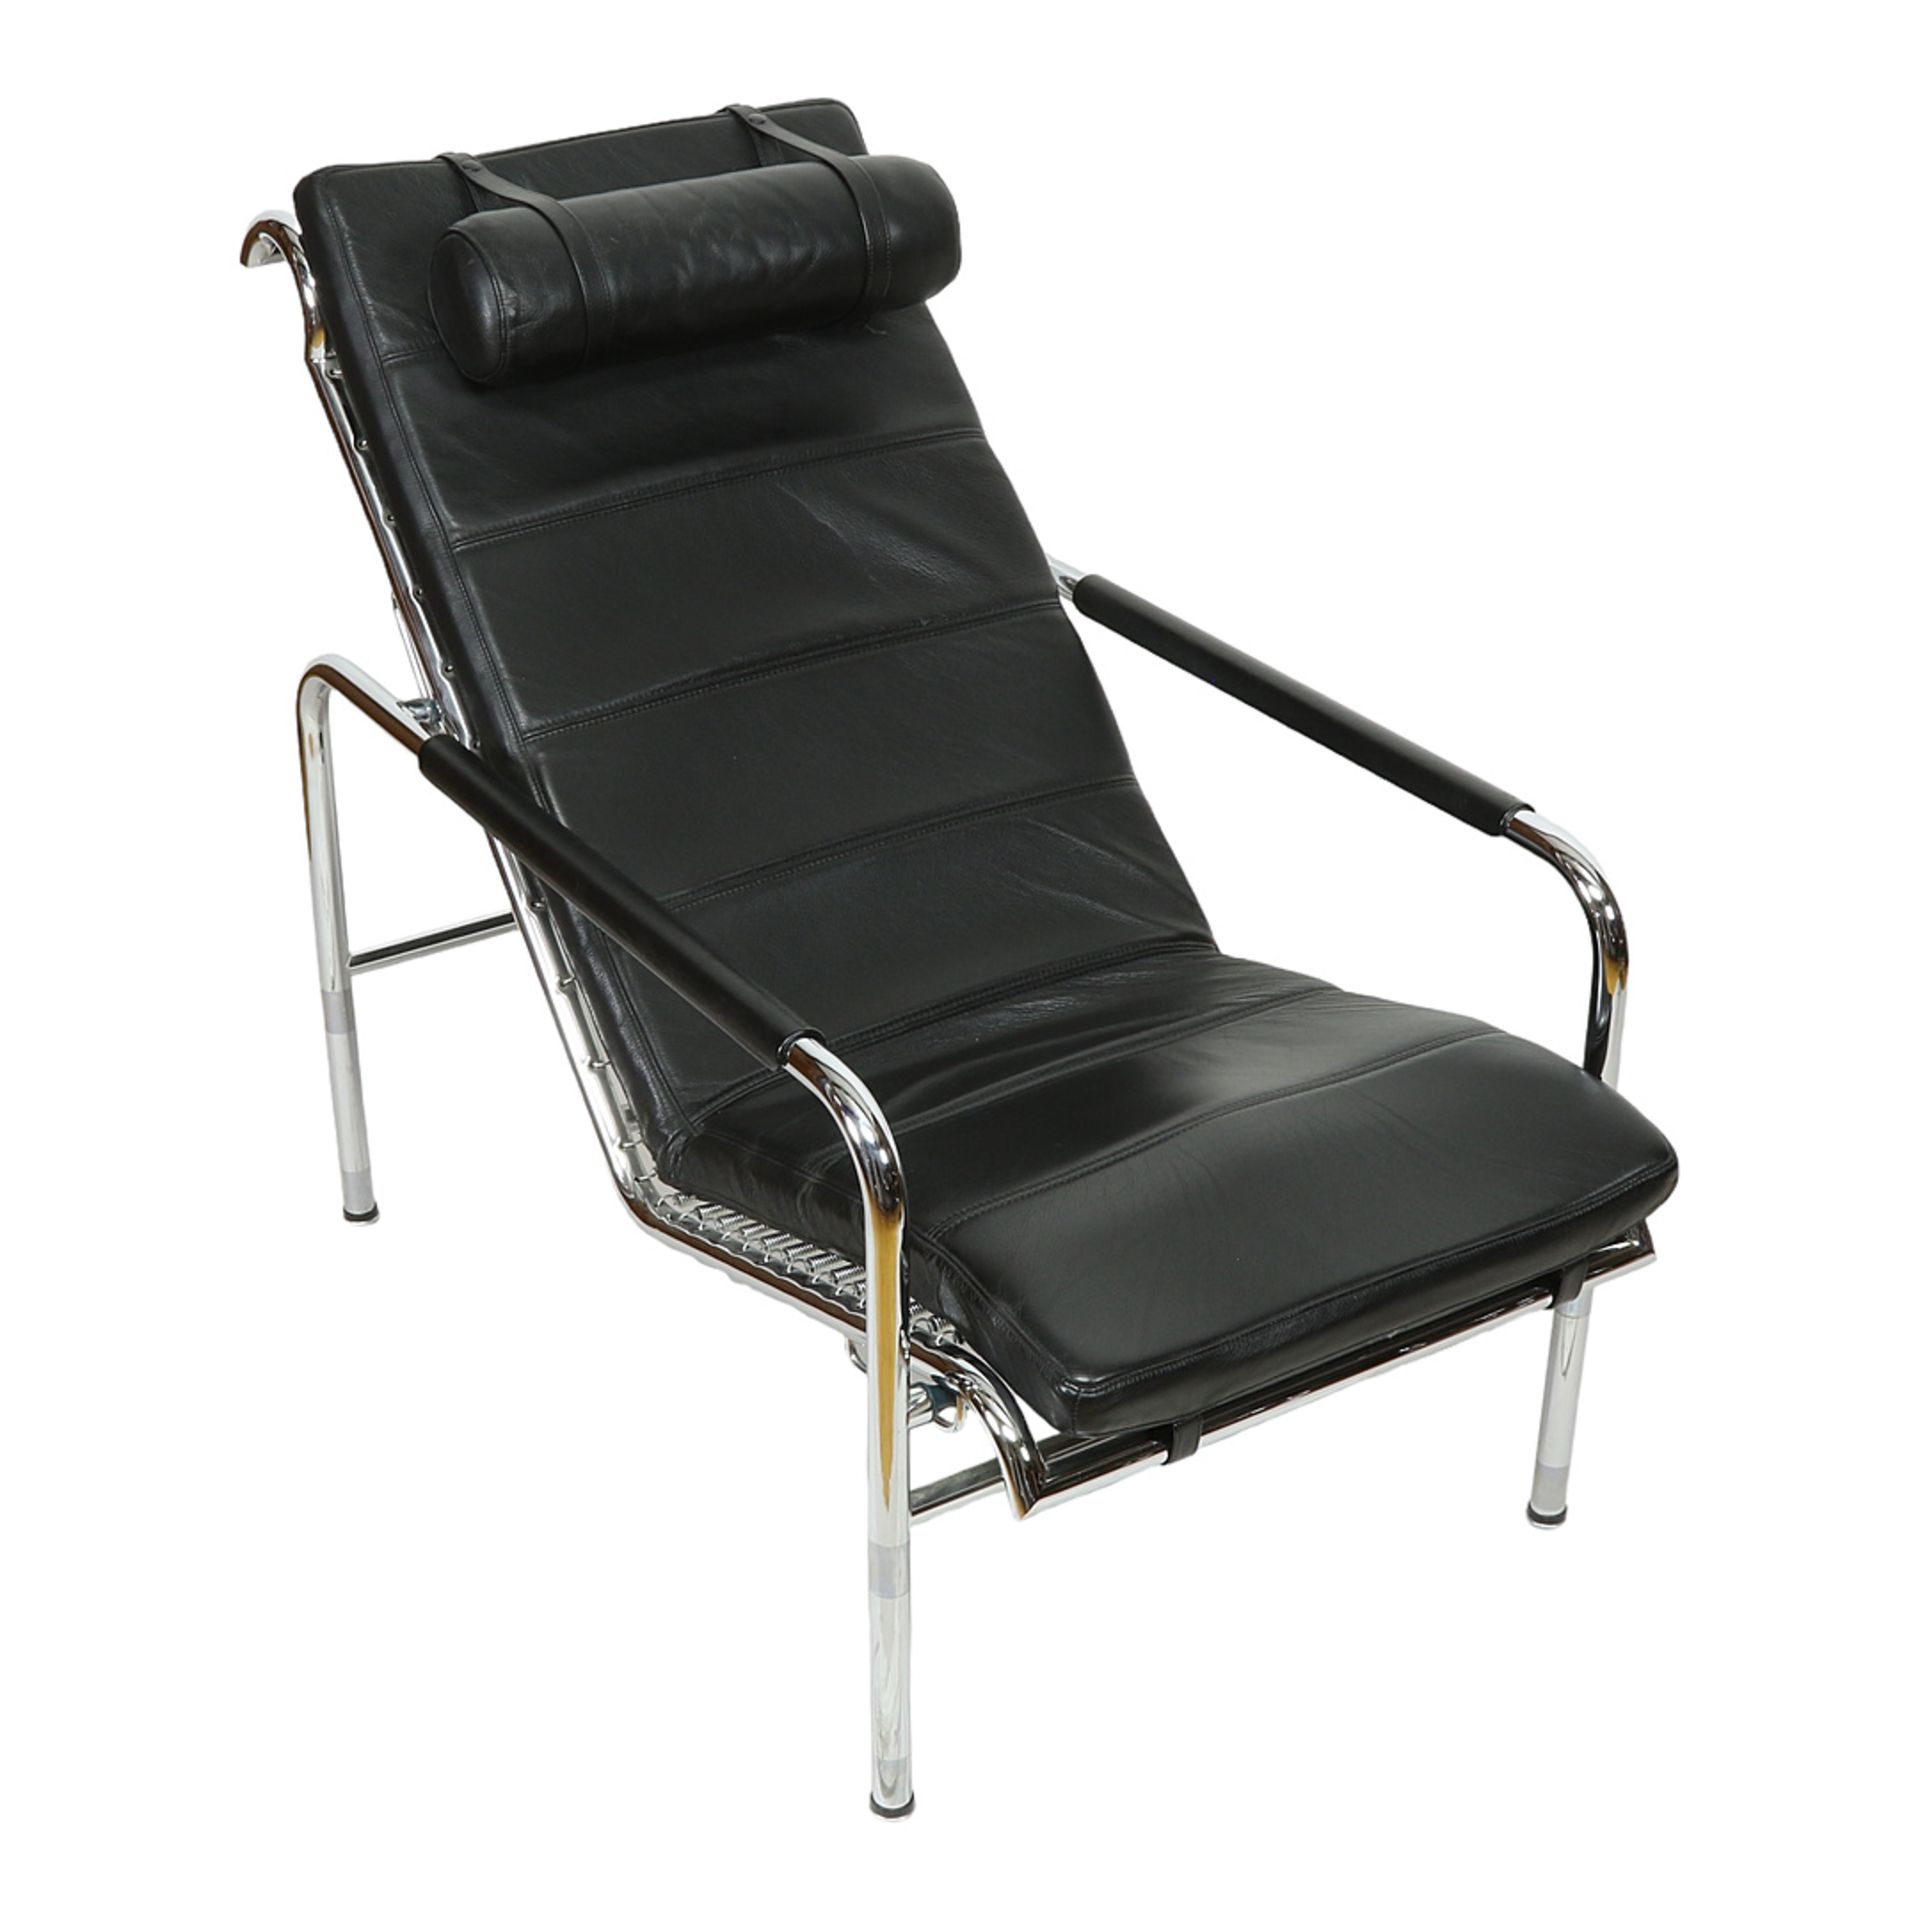 Chaise longue with stool, chrome-plated steel, black leather cover - Image 4 of 9